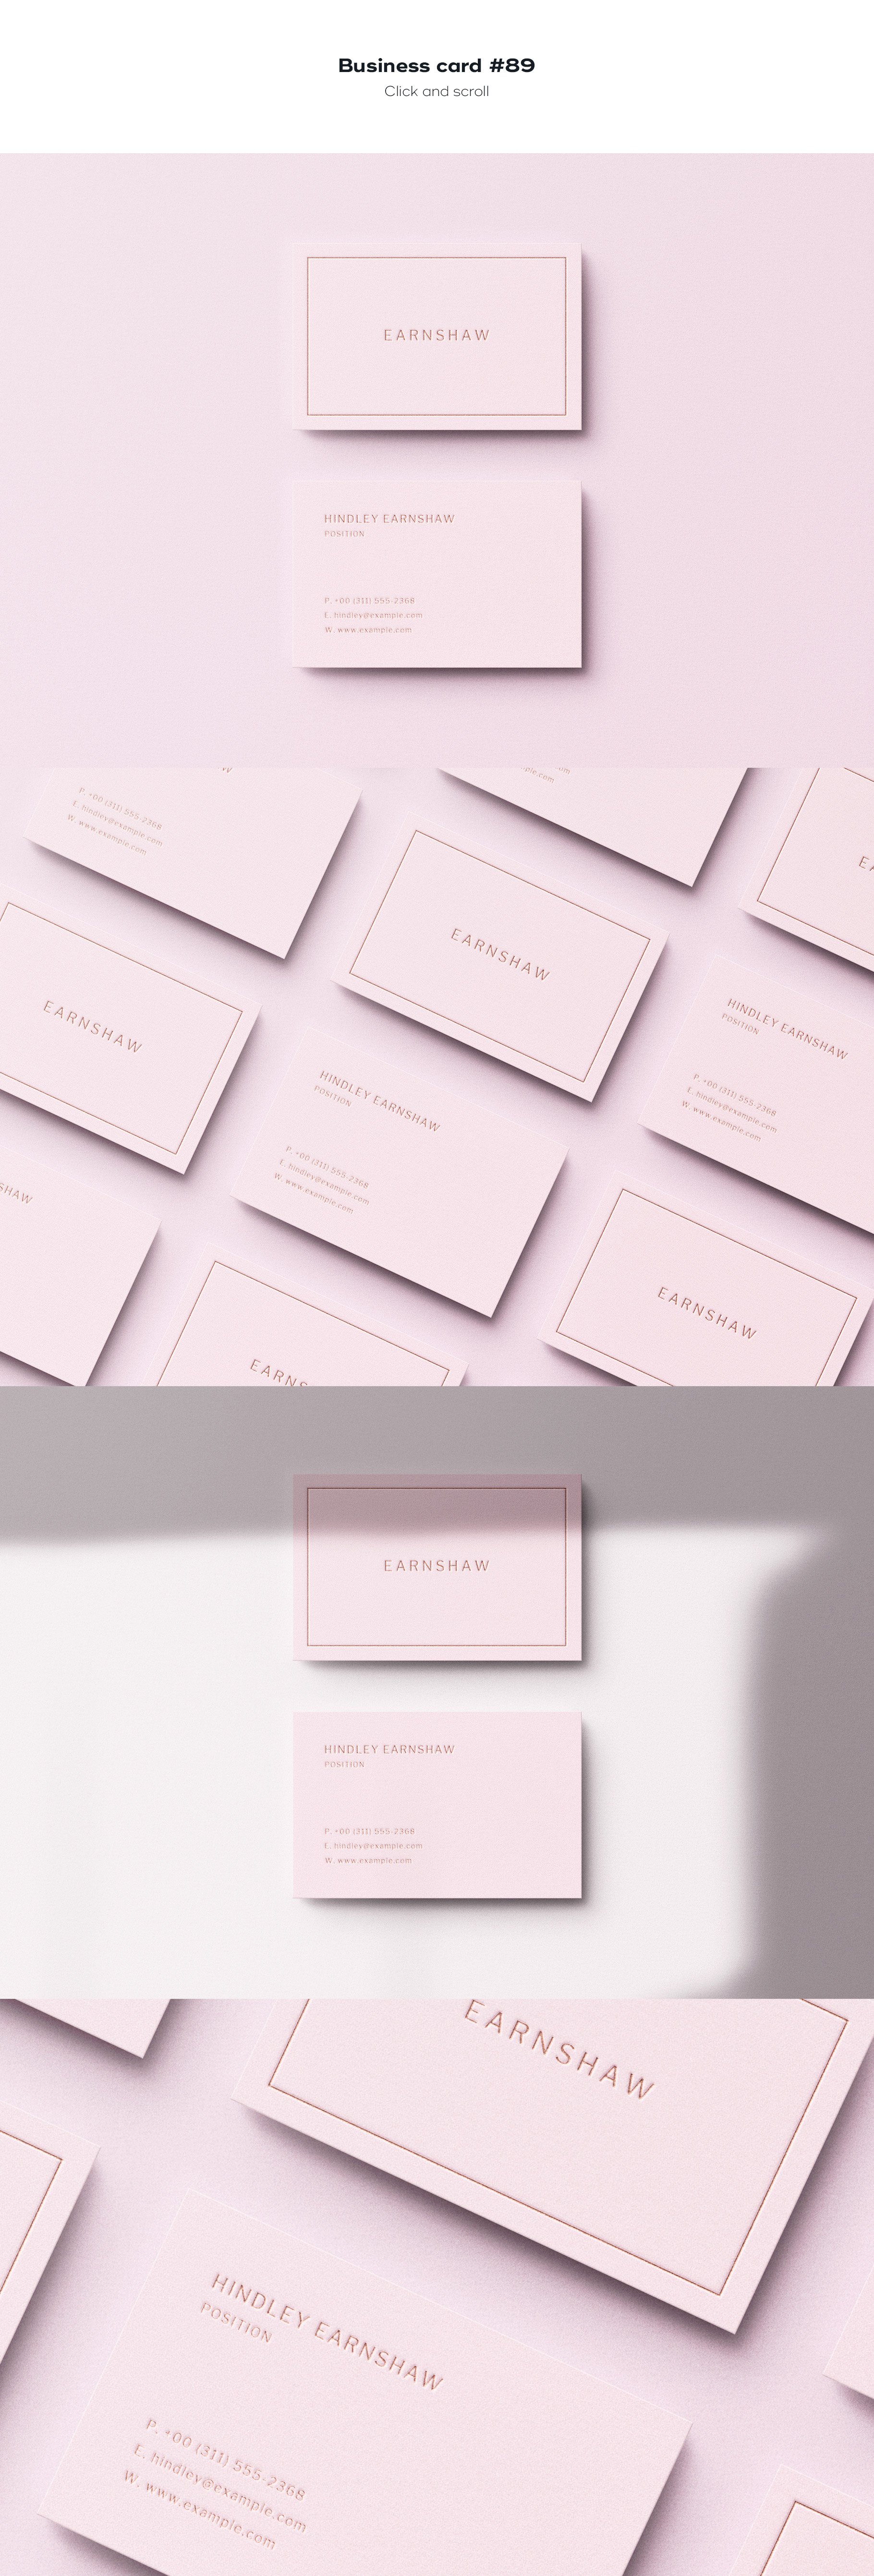 business card 89 859